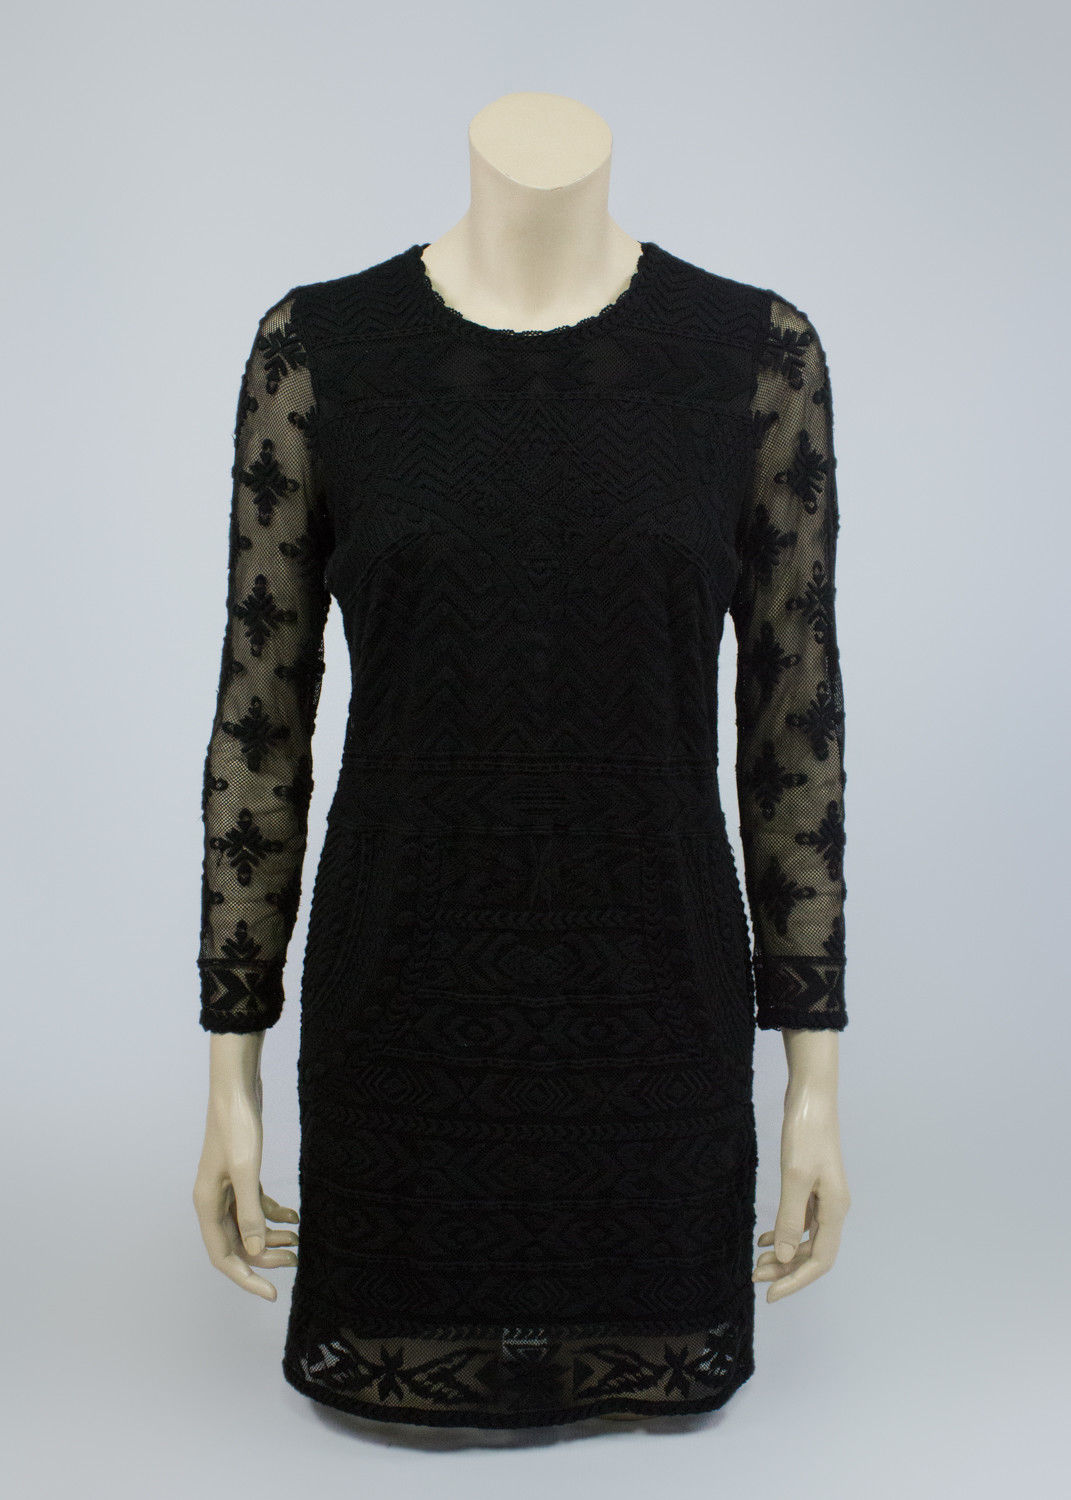 ISABEL MARANT x H&M Collaboration Black Lace Dress, SIZE M - secondfirst